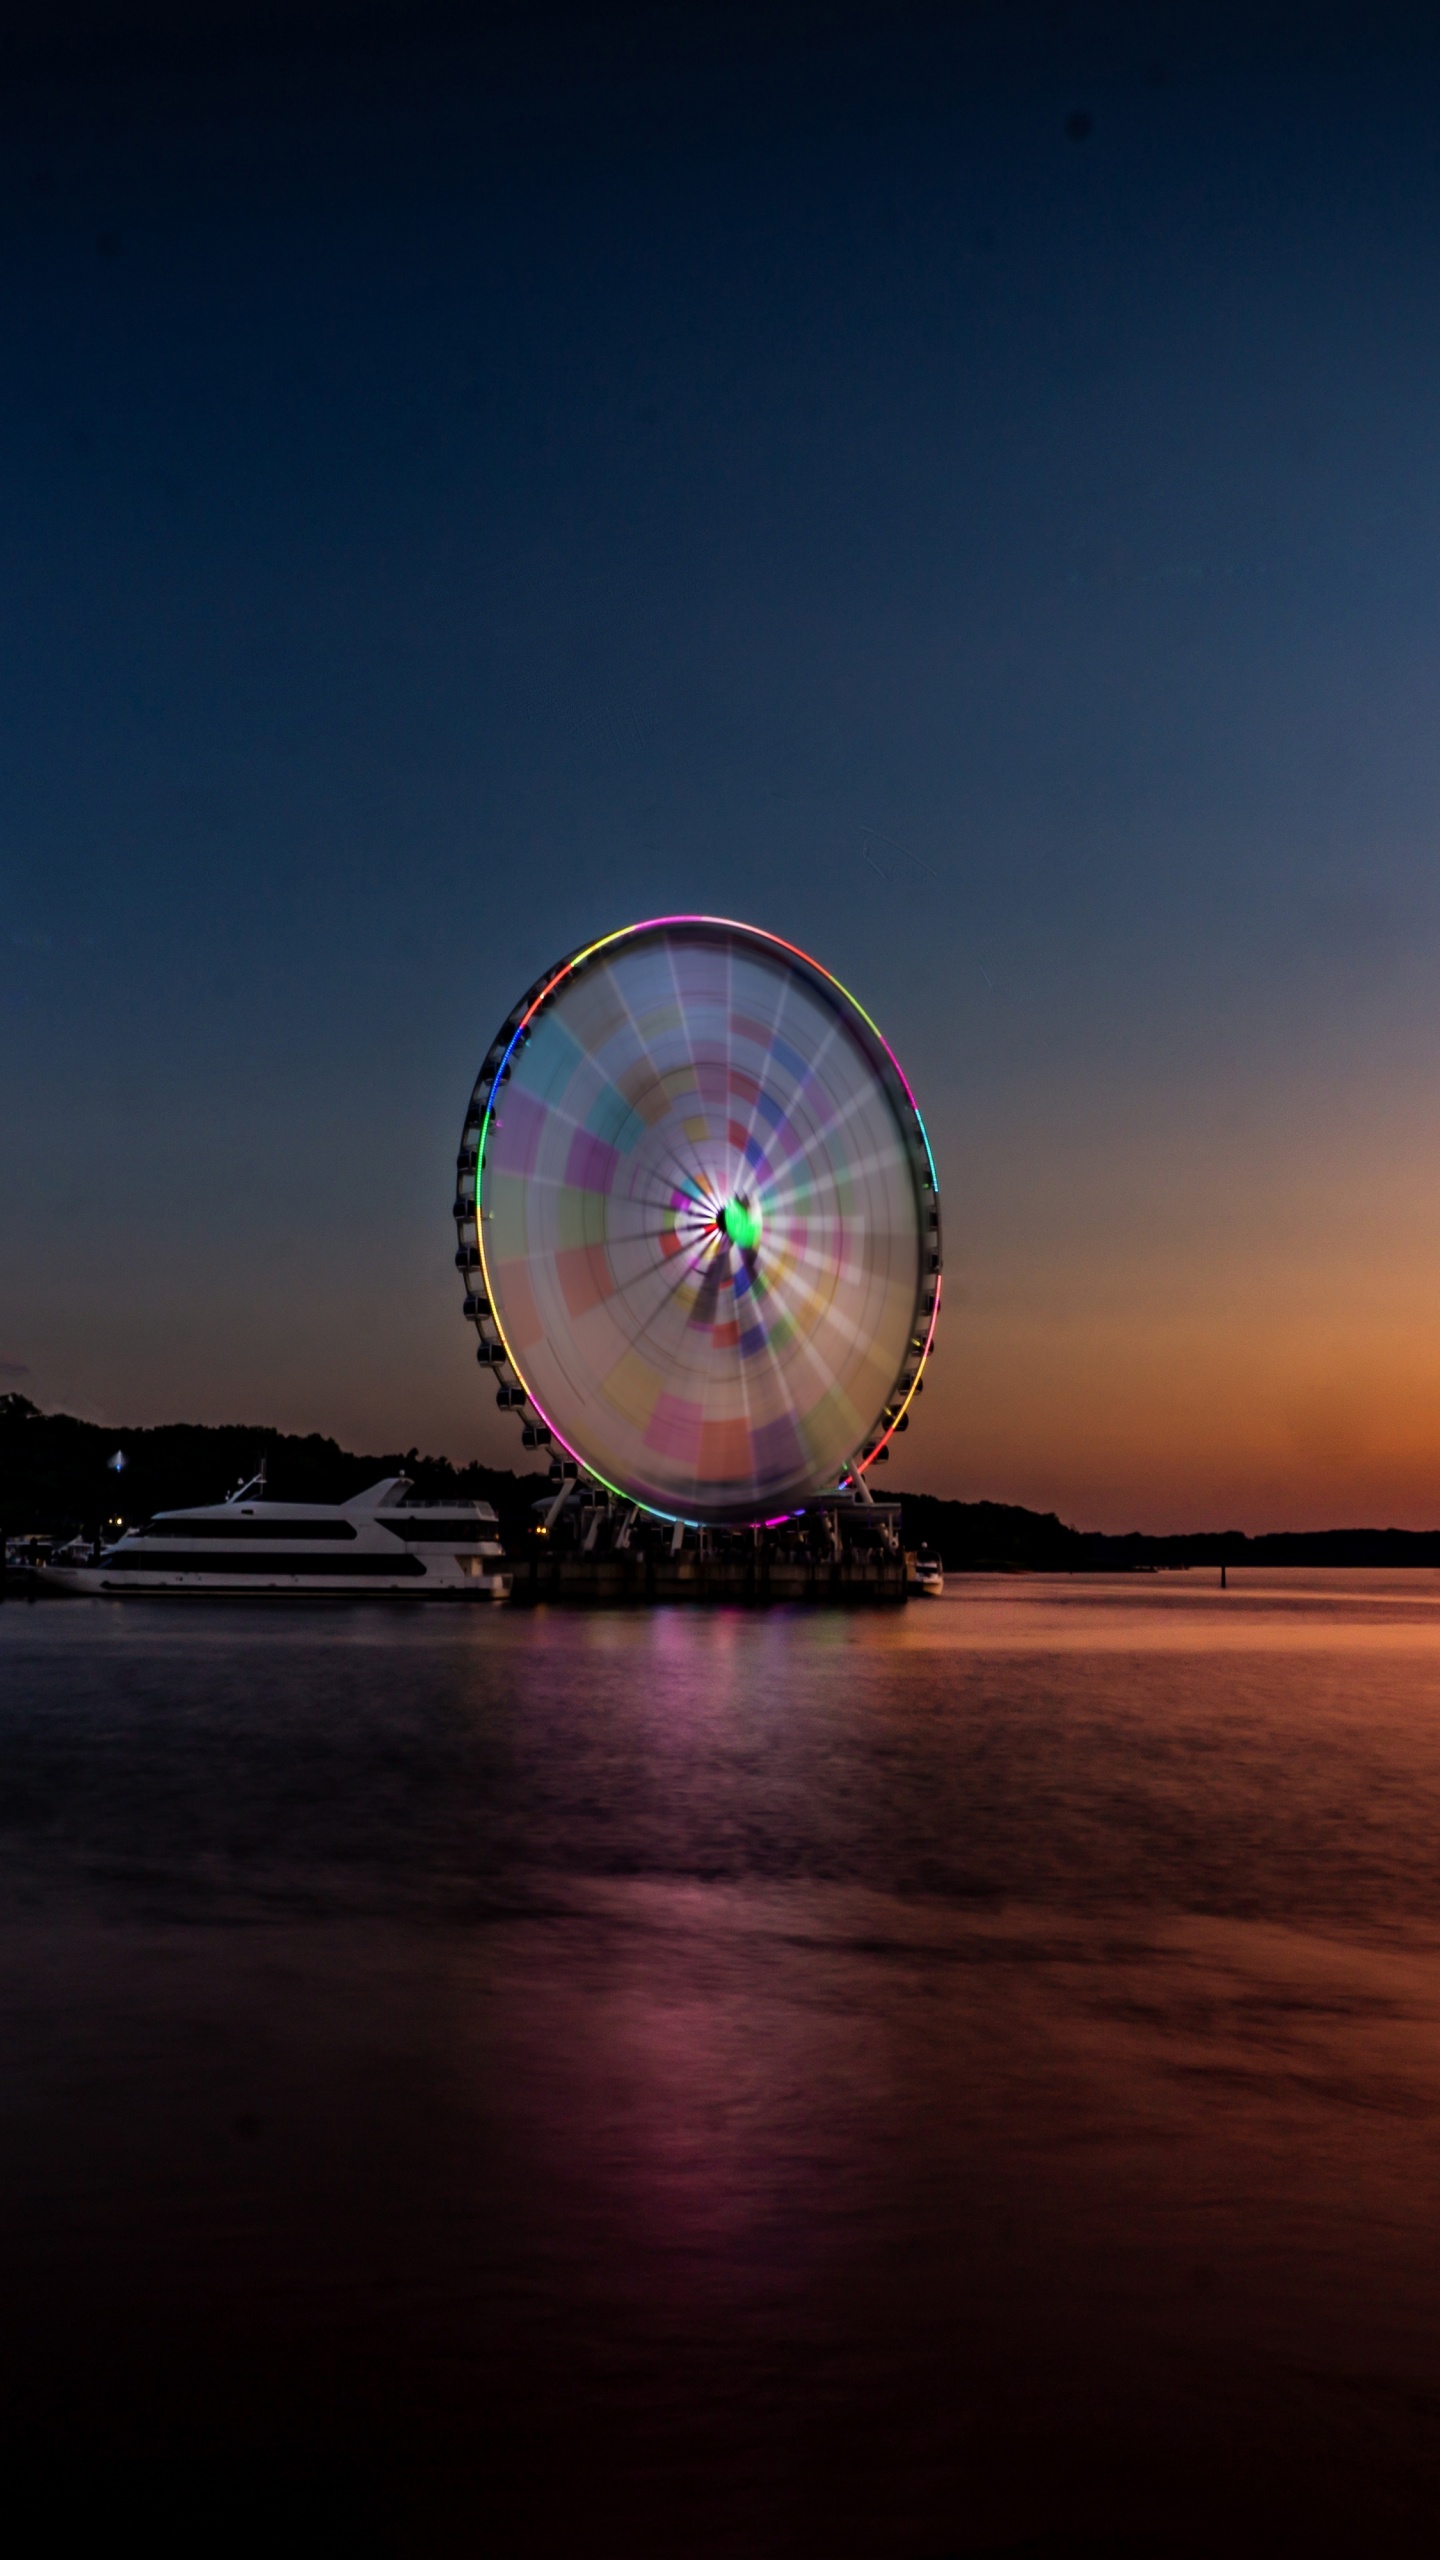 Ferris Wheel Near Body of Water During Night Time. Wallpaper in 1440x2560 Resolution